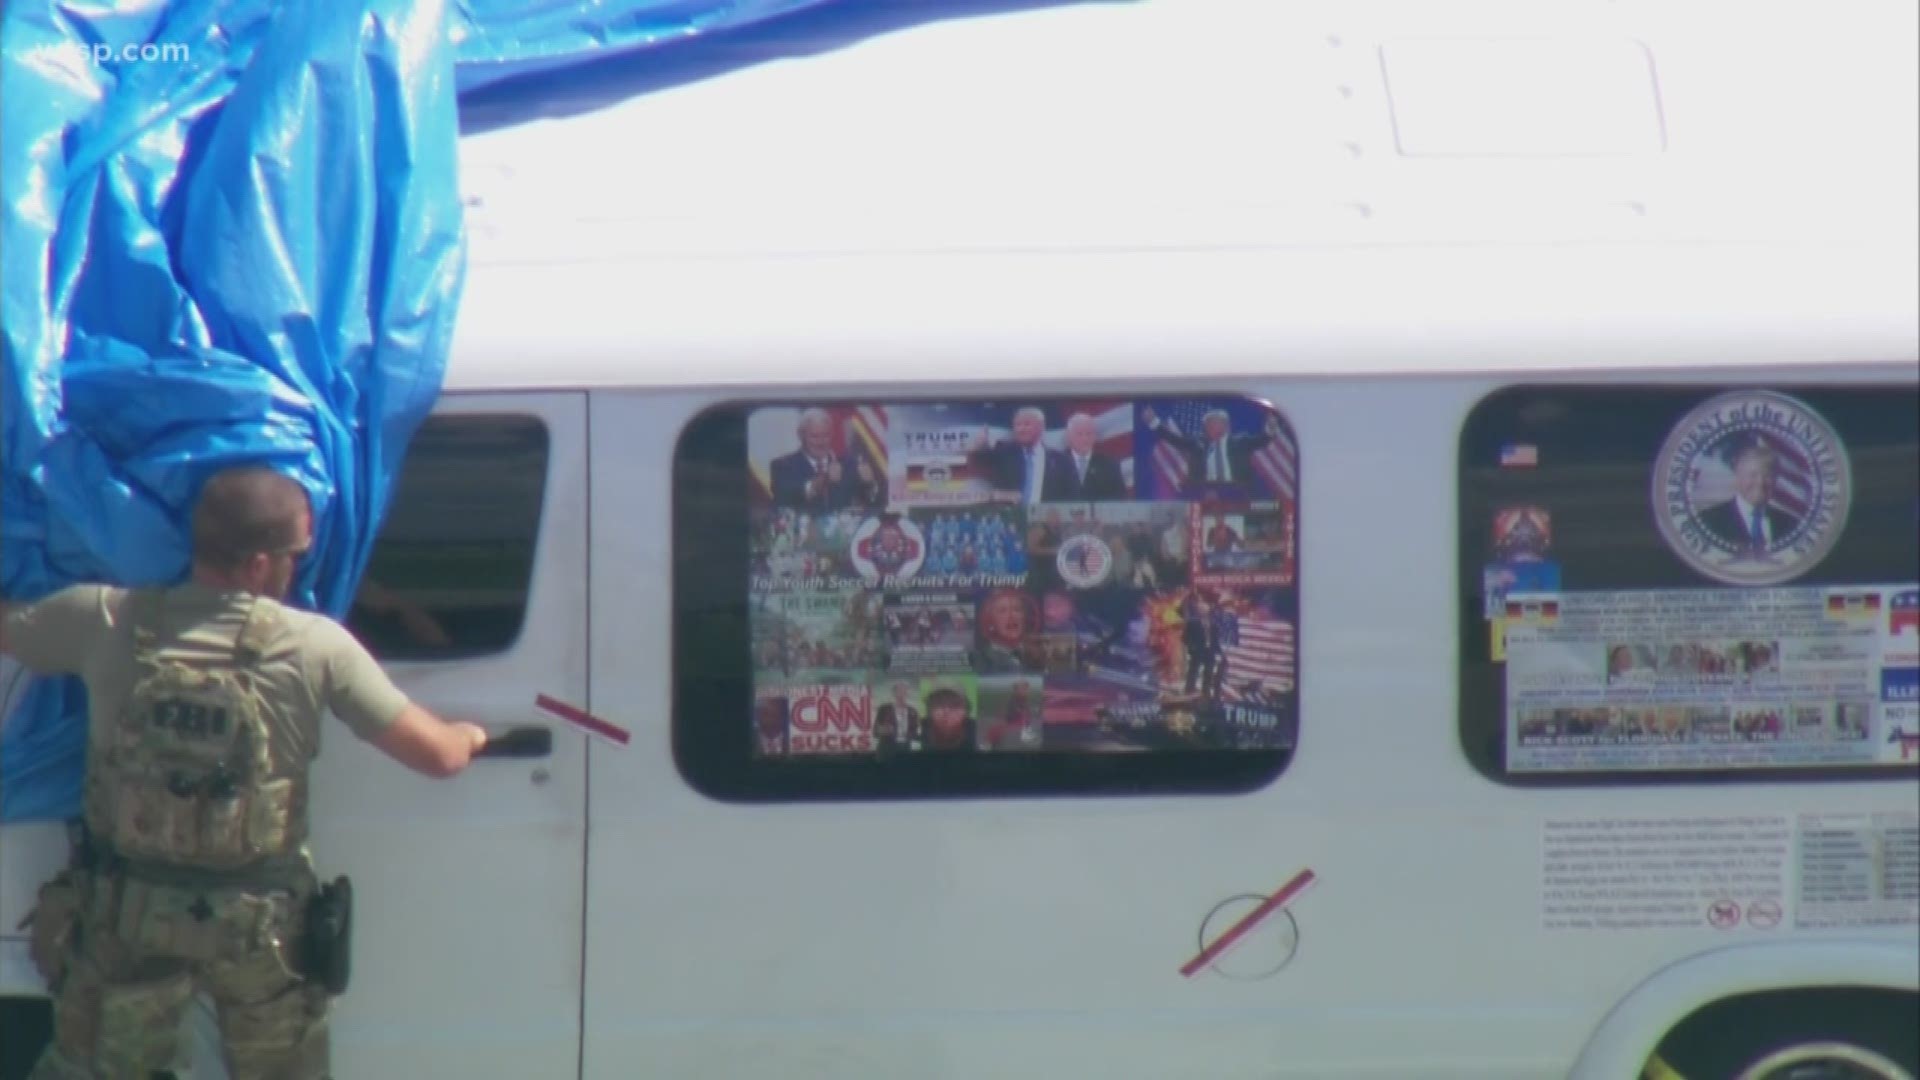 The suspect has been identified as Cesar Sayoc, sources tell 10Investigates.